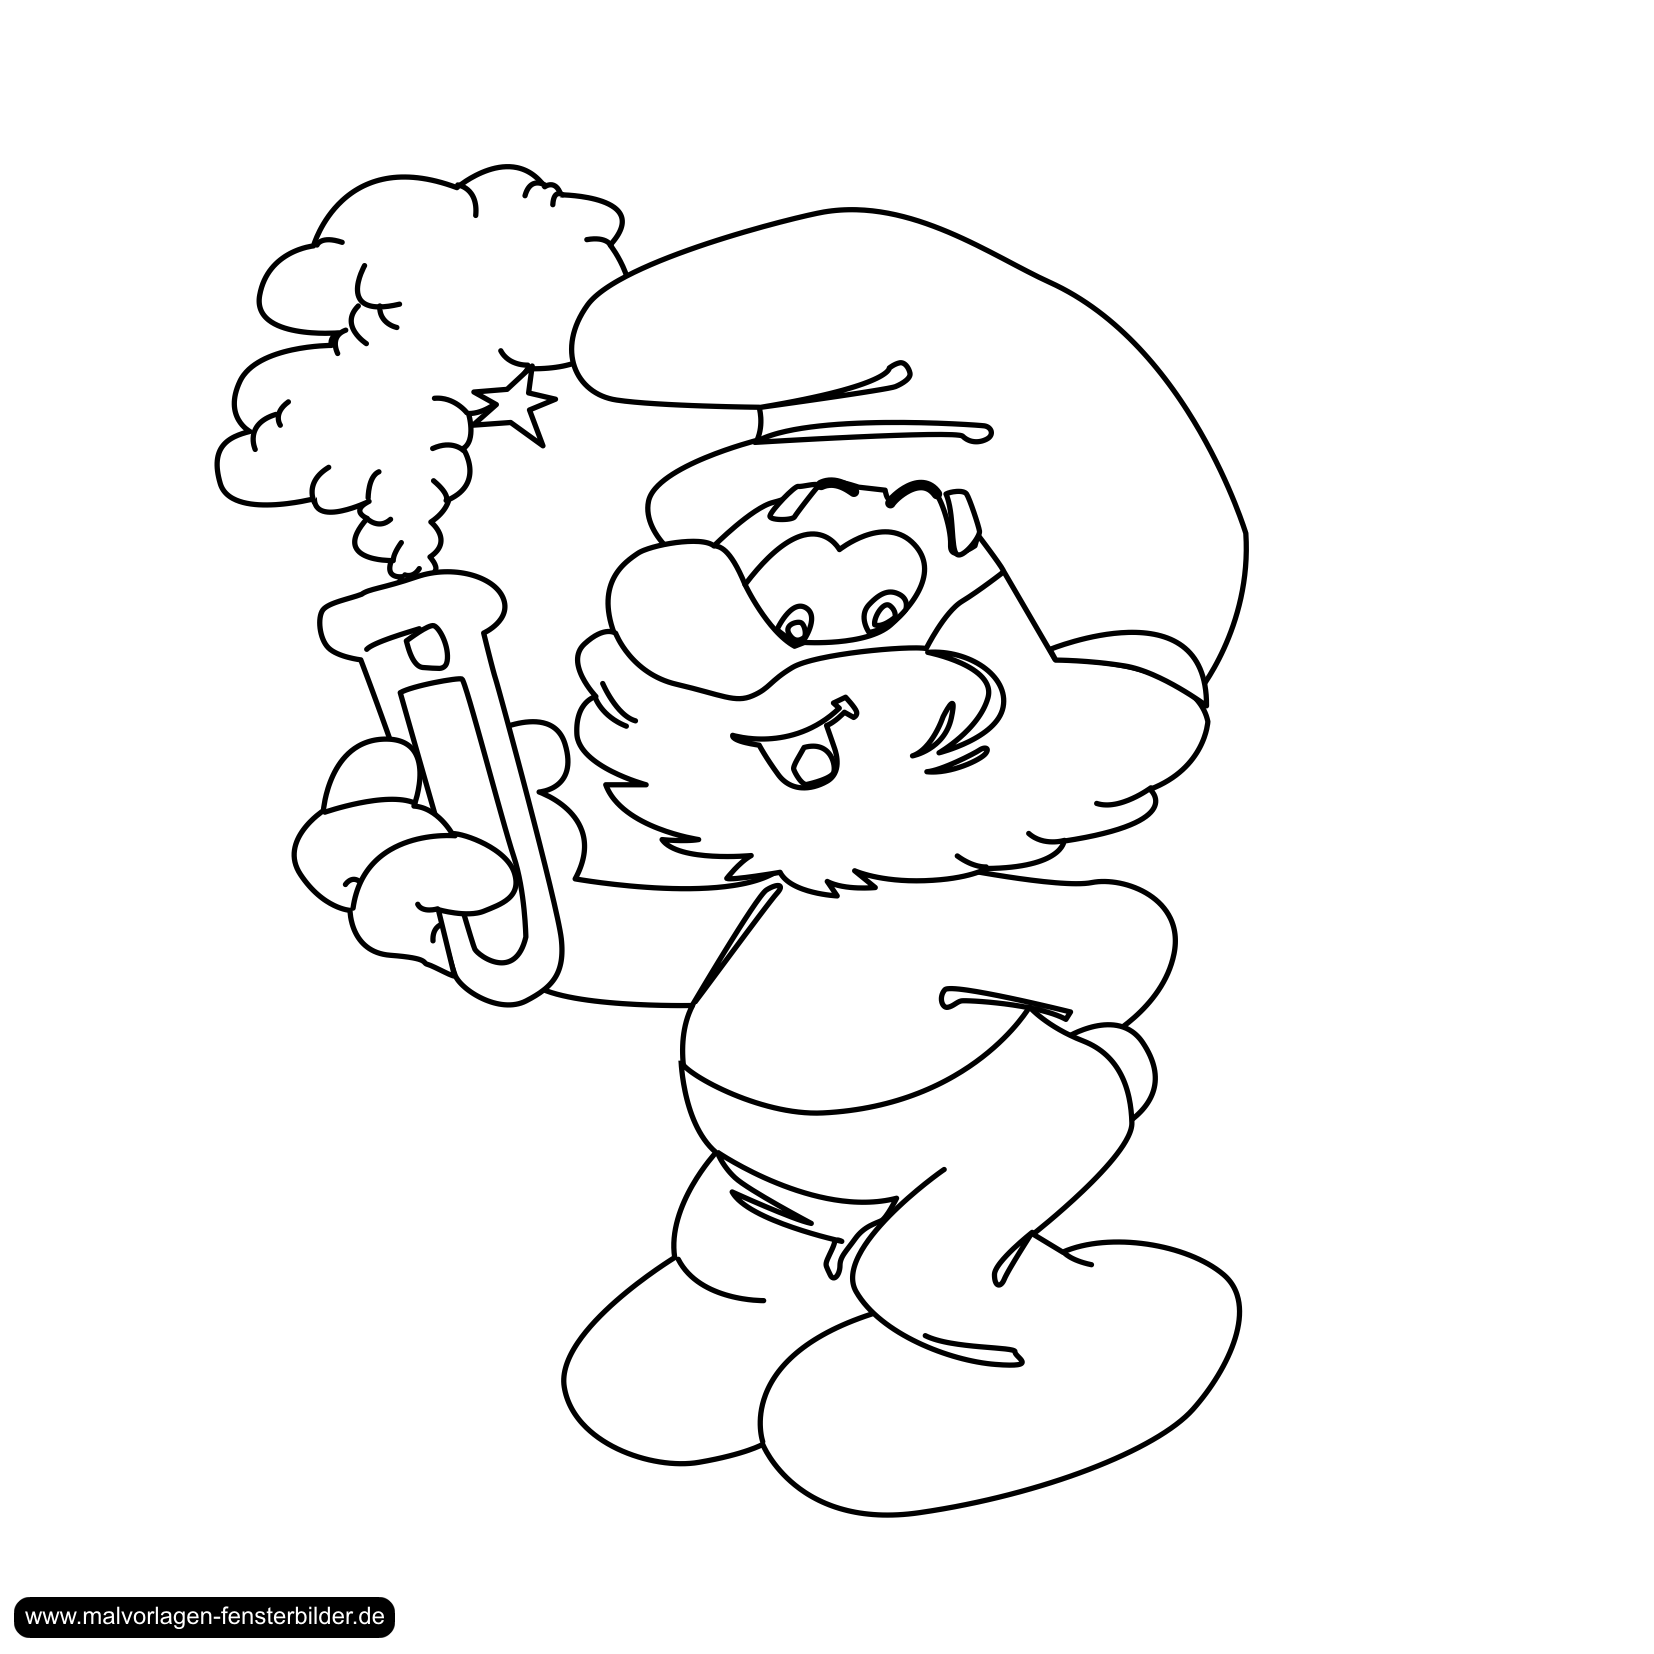 Pin By Only Coloring Pages On The Smurfs Les Schtroumpfs Cartoon Coloring Pages Coloring Pages Coloring Pages To Print